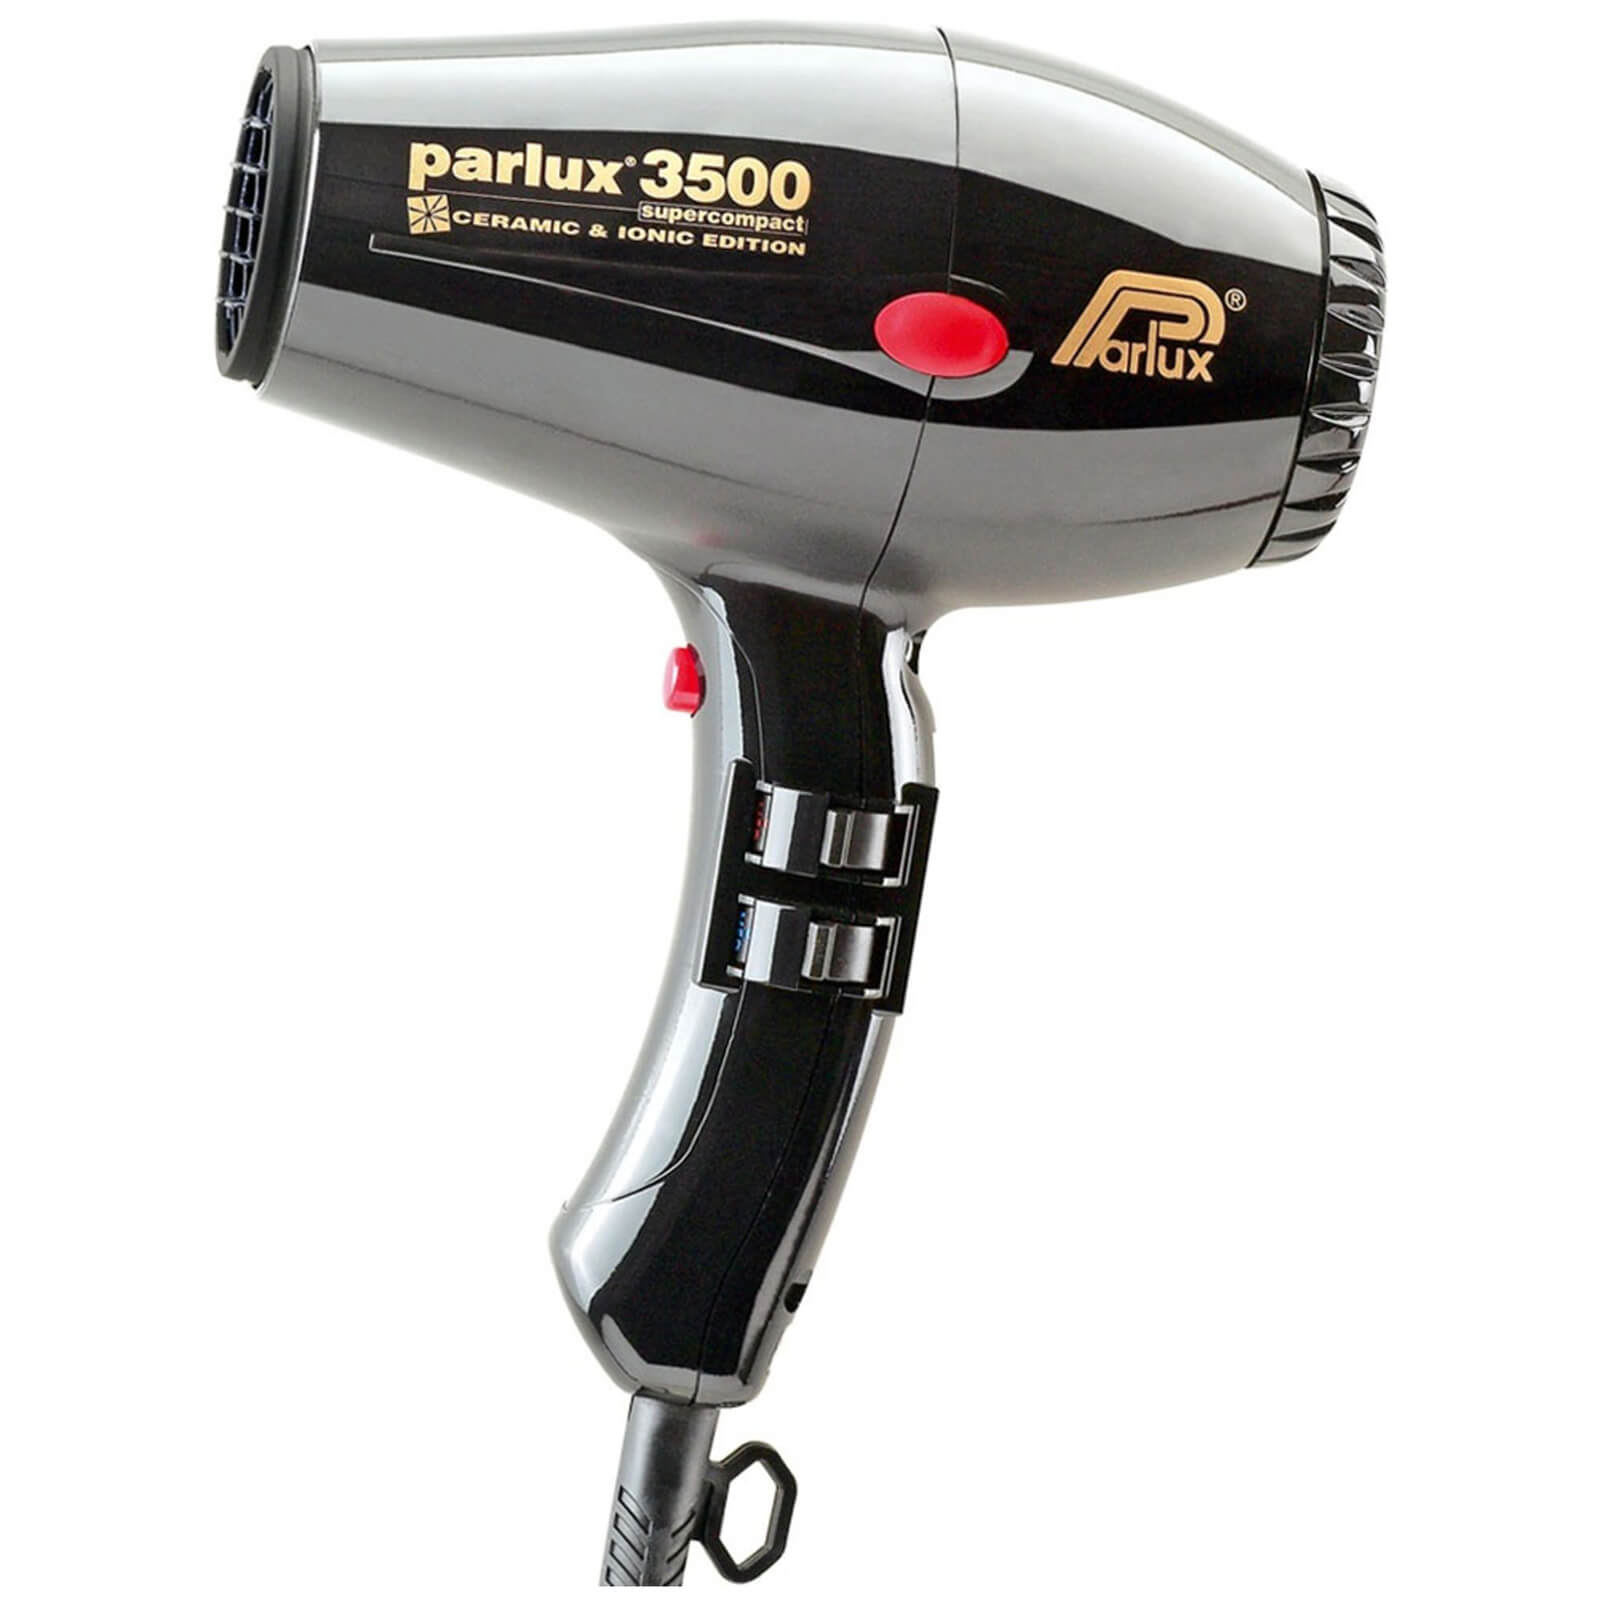 Parlux 3500 Super Compact Ceramic & Ionic Hair Dryer 2000W (Various Shades) - Black